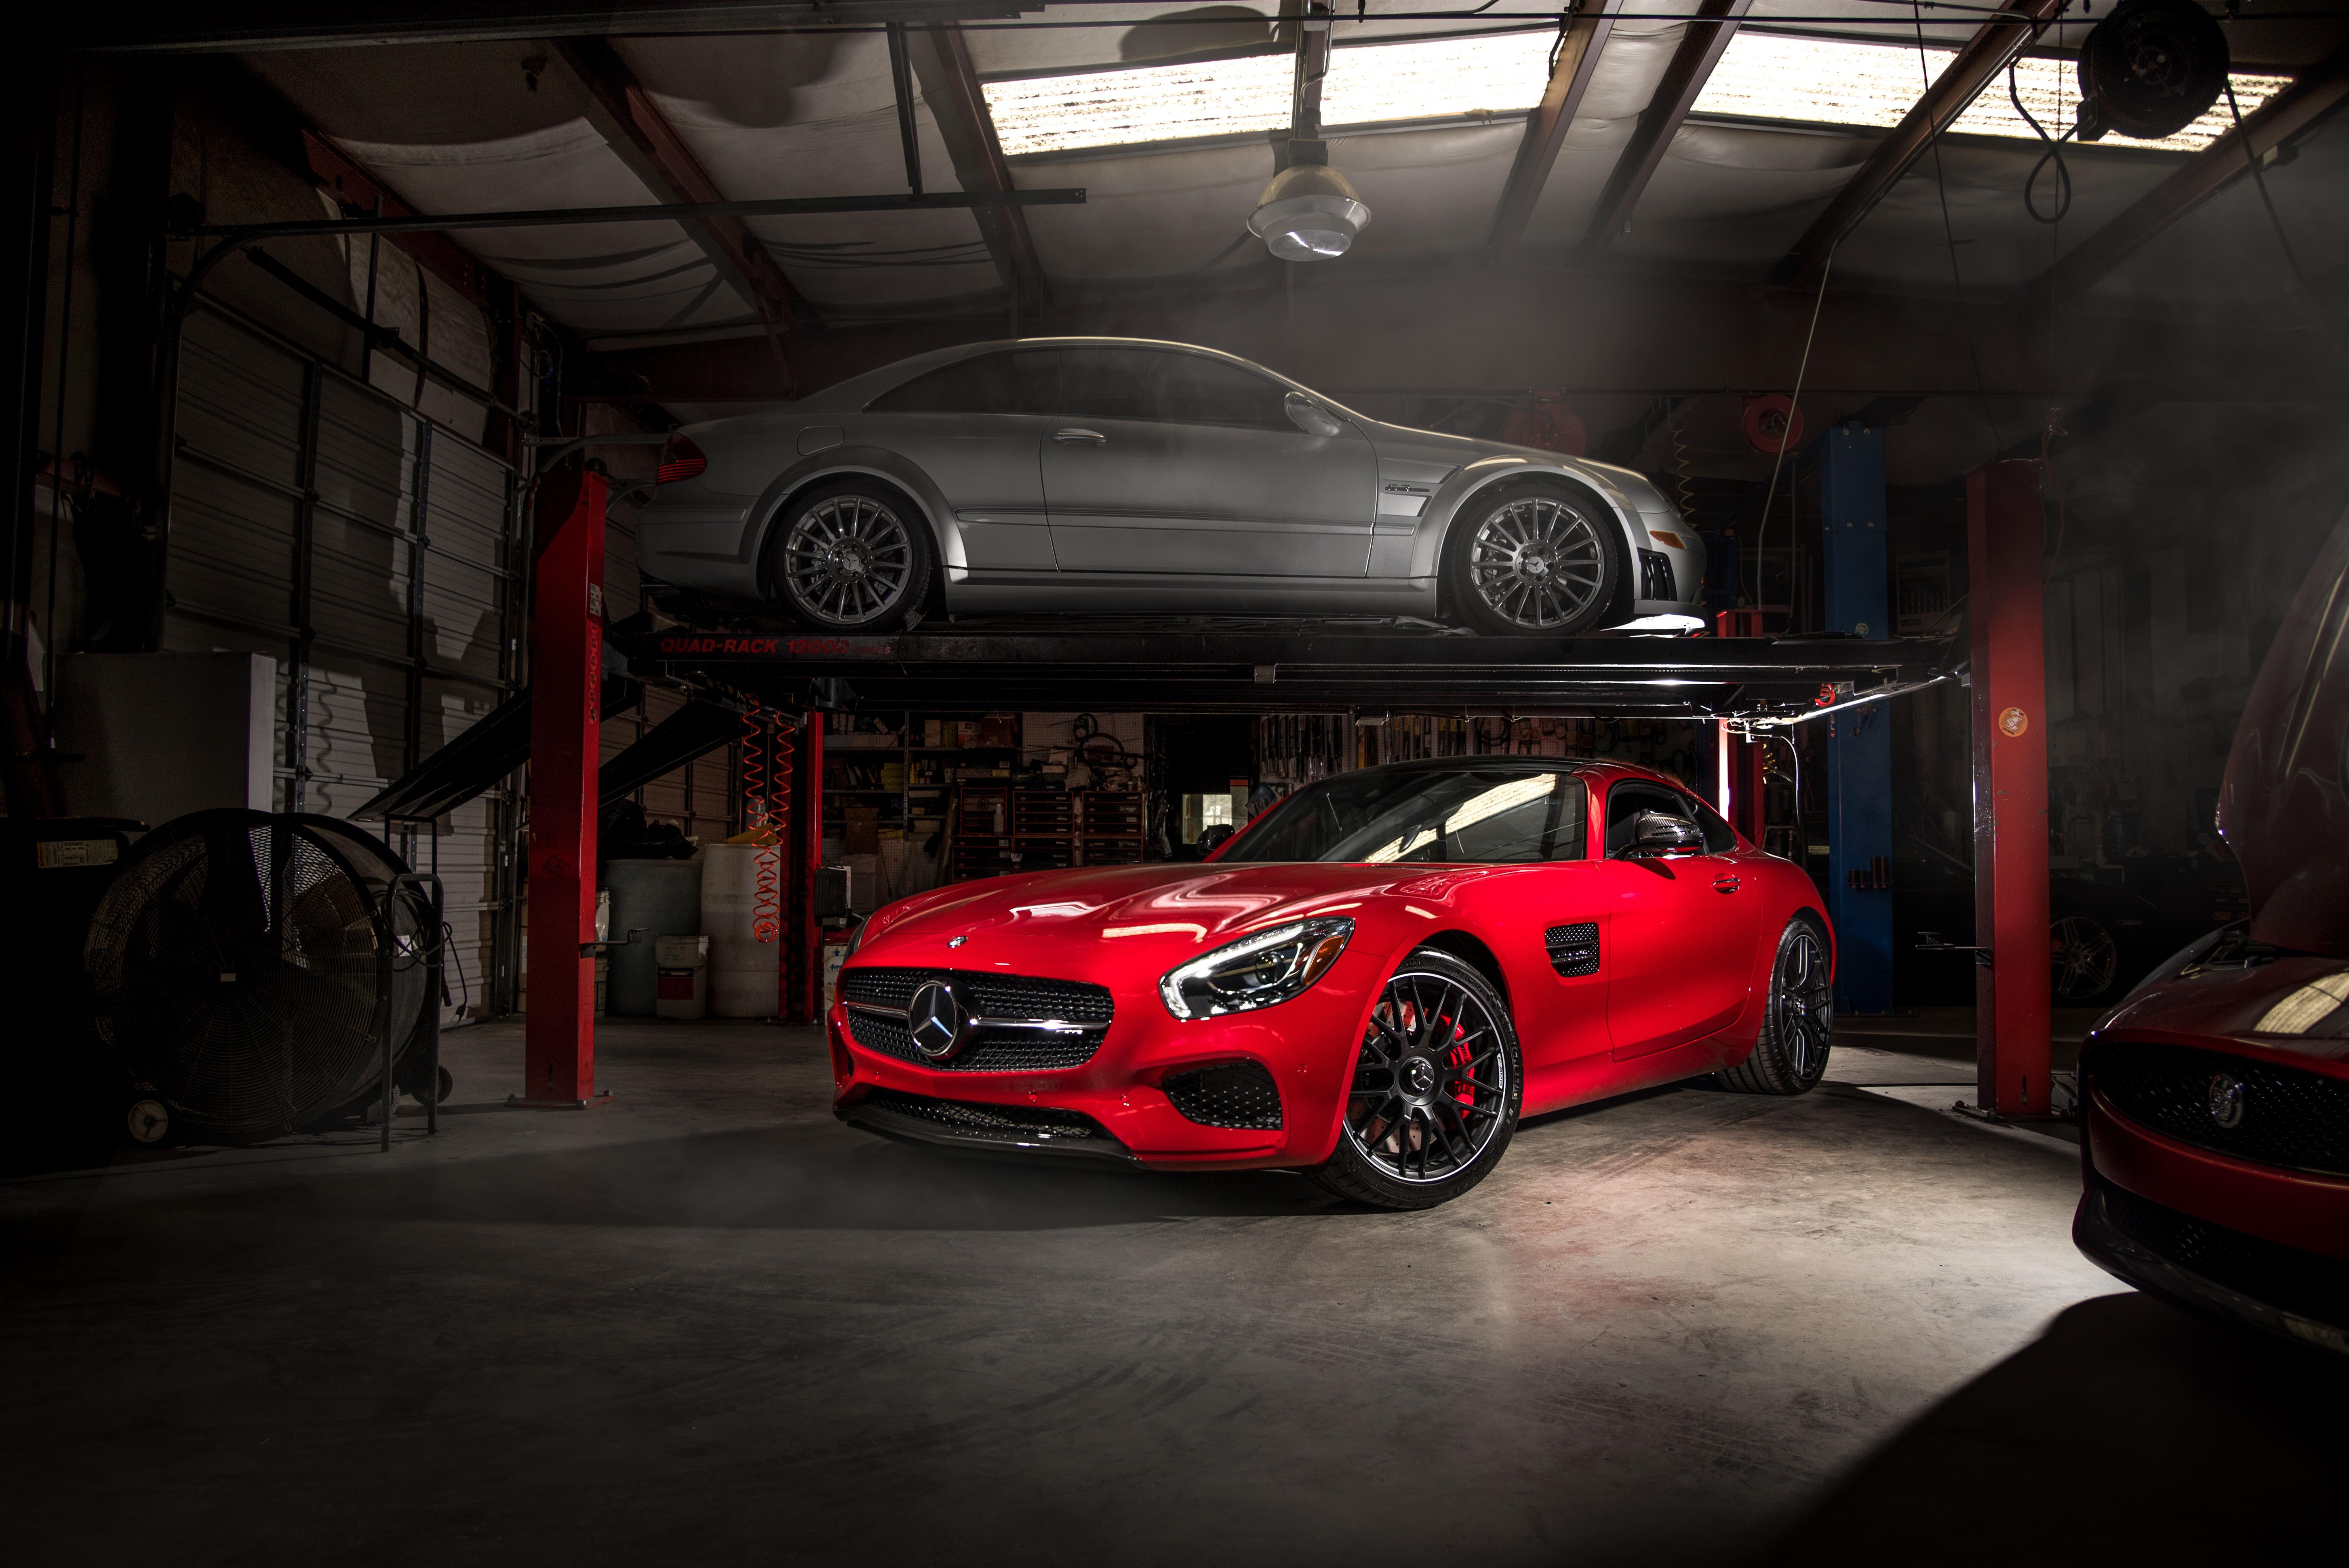 Your Ridiculously Awesome Mercedes AMG GT Wallpaper Are Here